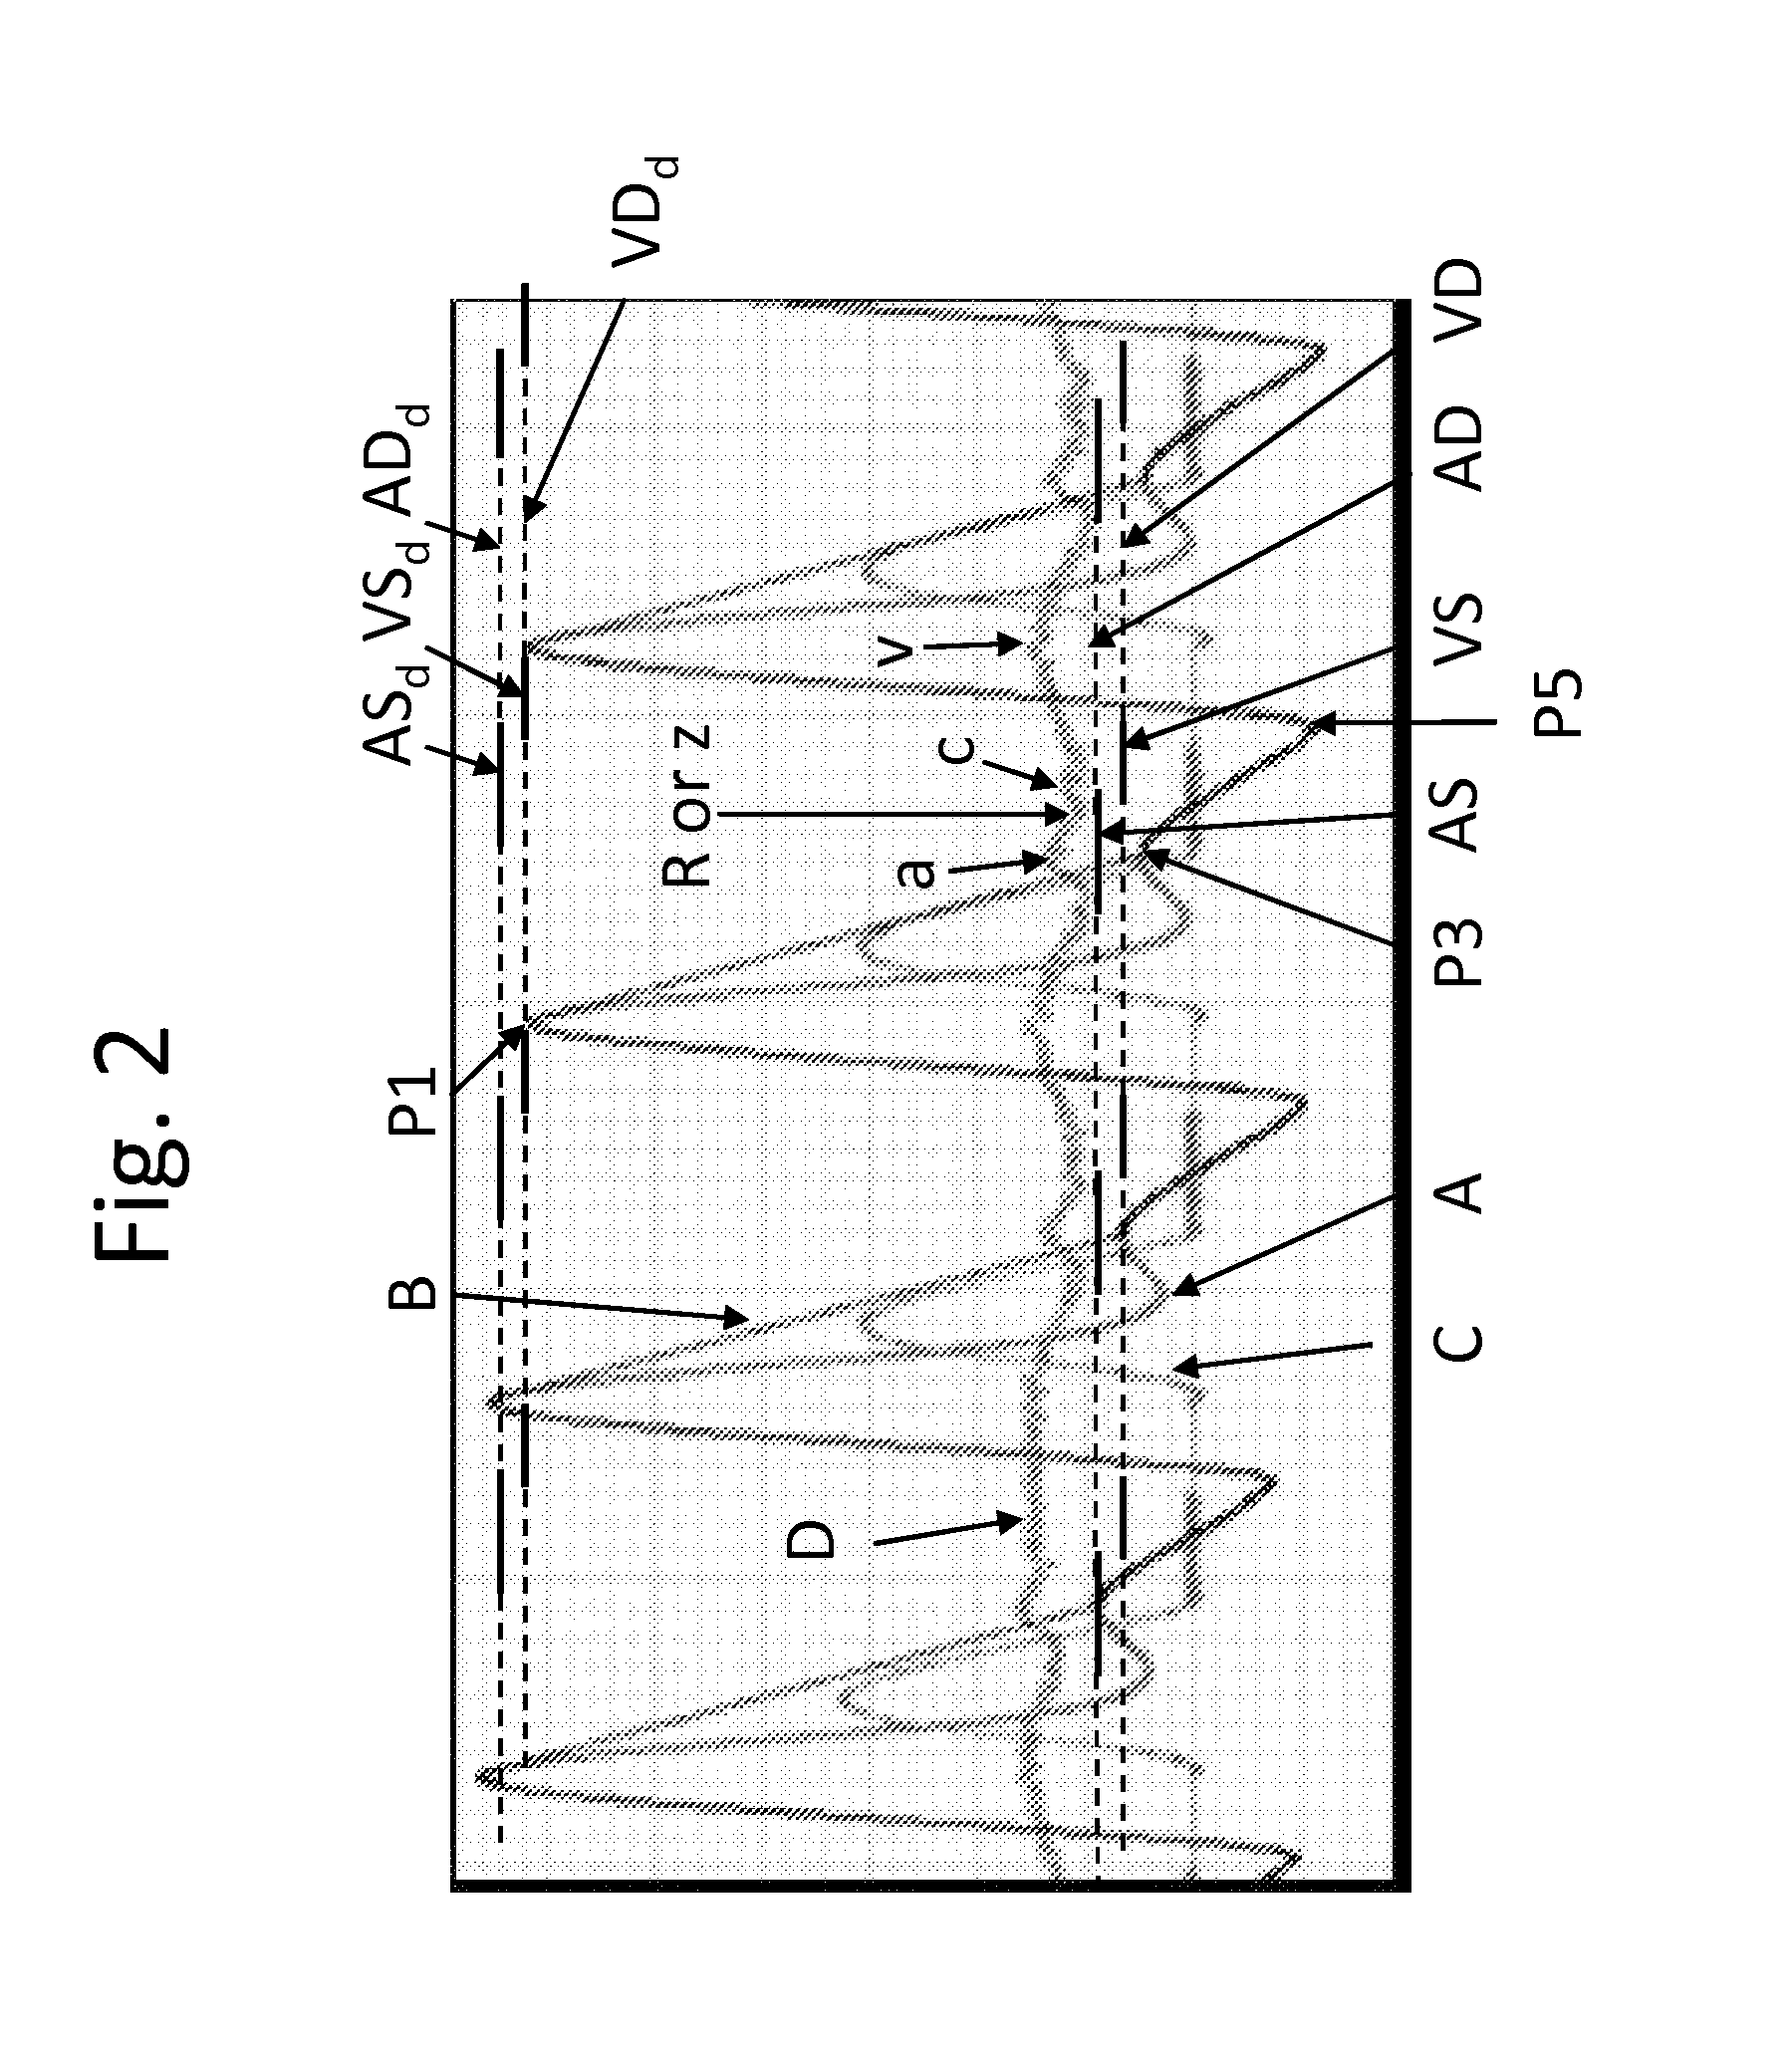 System and method for monitoring cardiac output, flow balance, and performance parameters